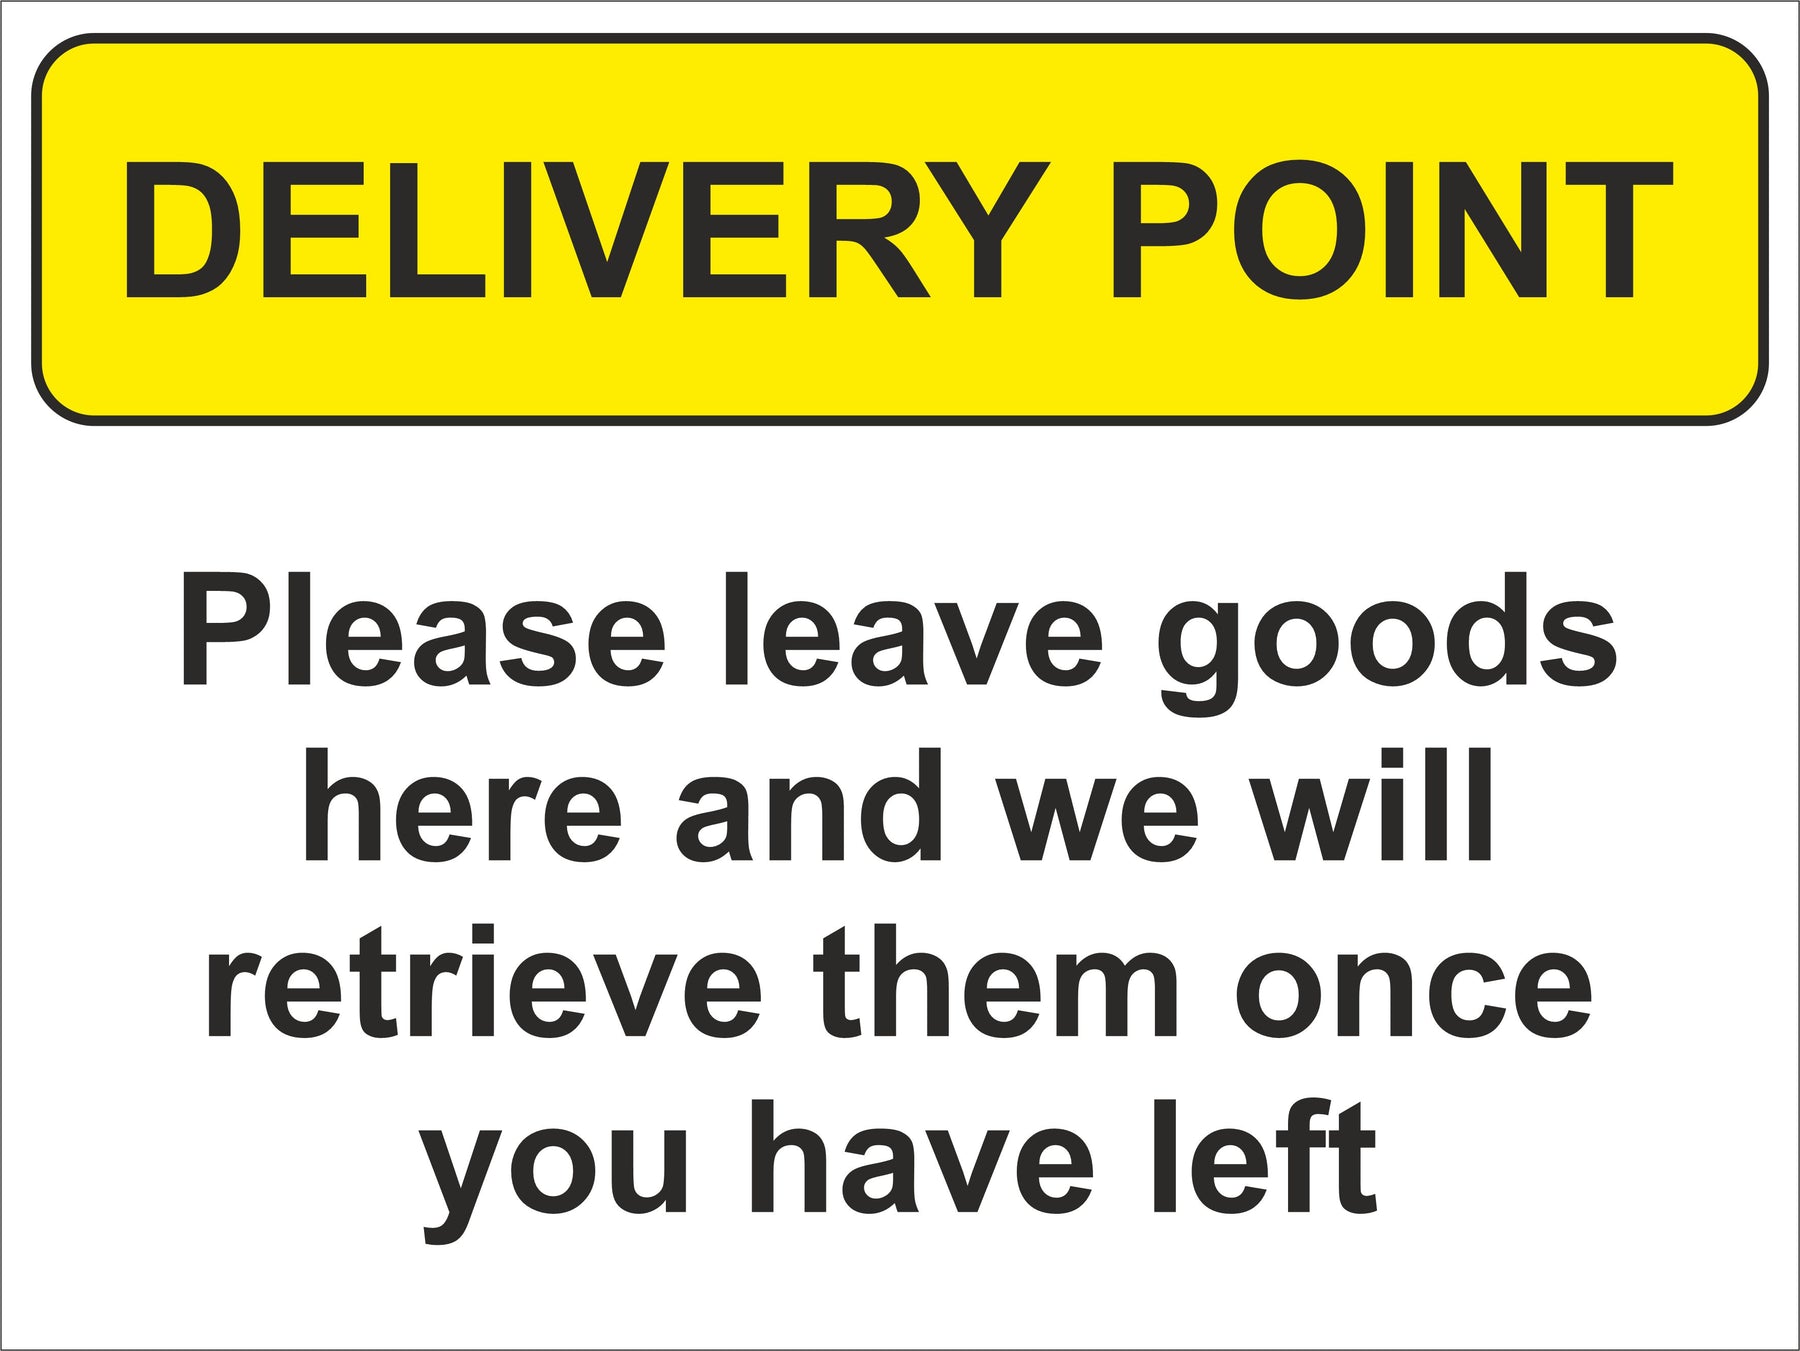 DELIVERY POINT SOCIAL DISTANCING SIGN - COVID 19